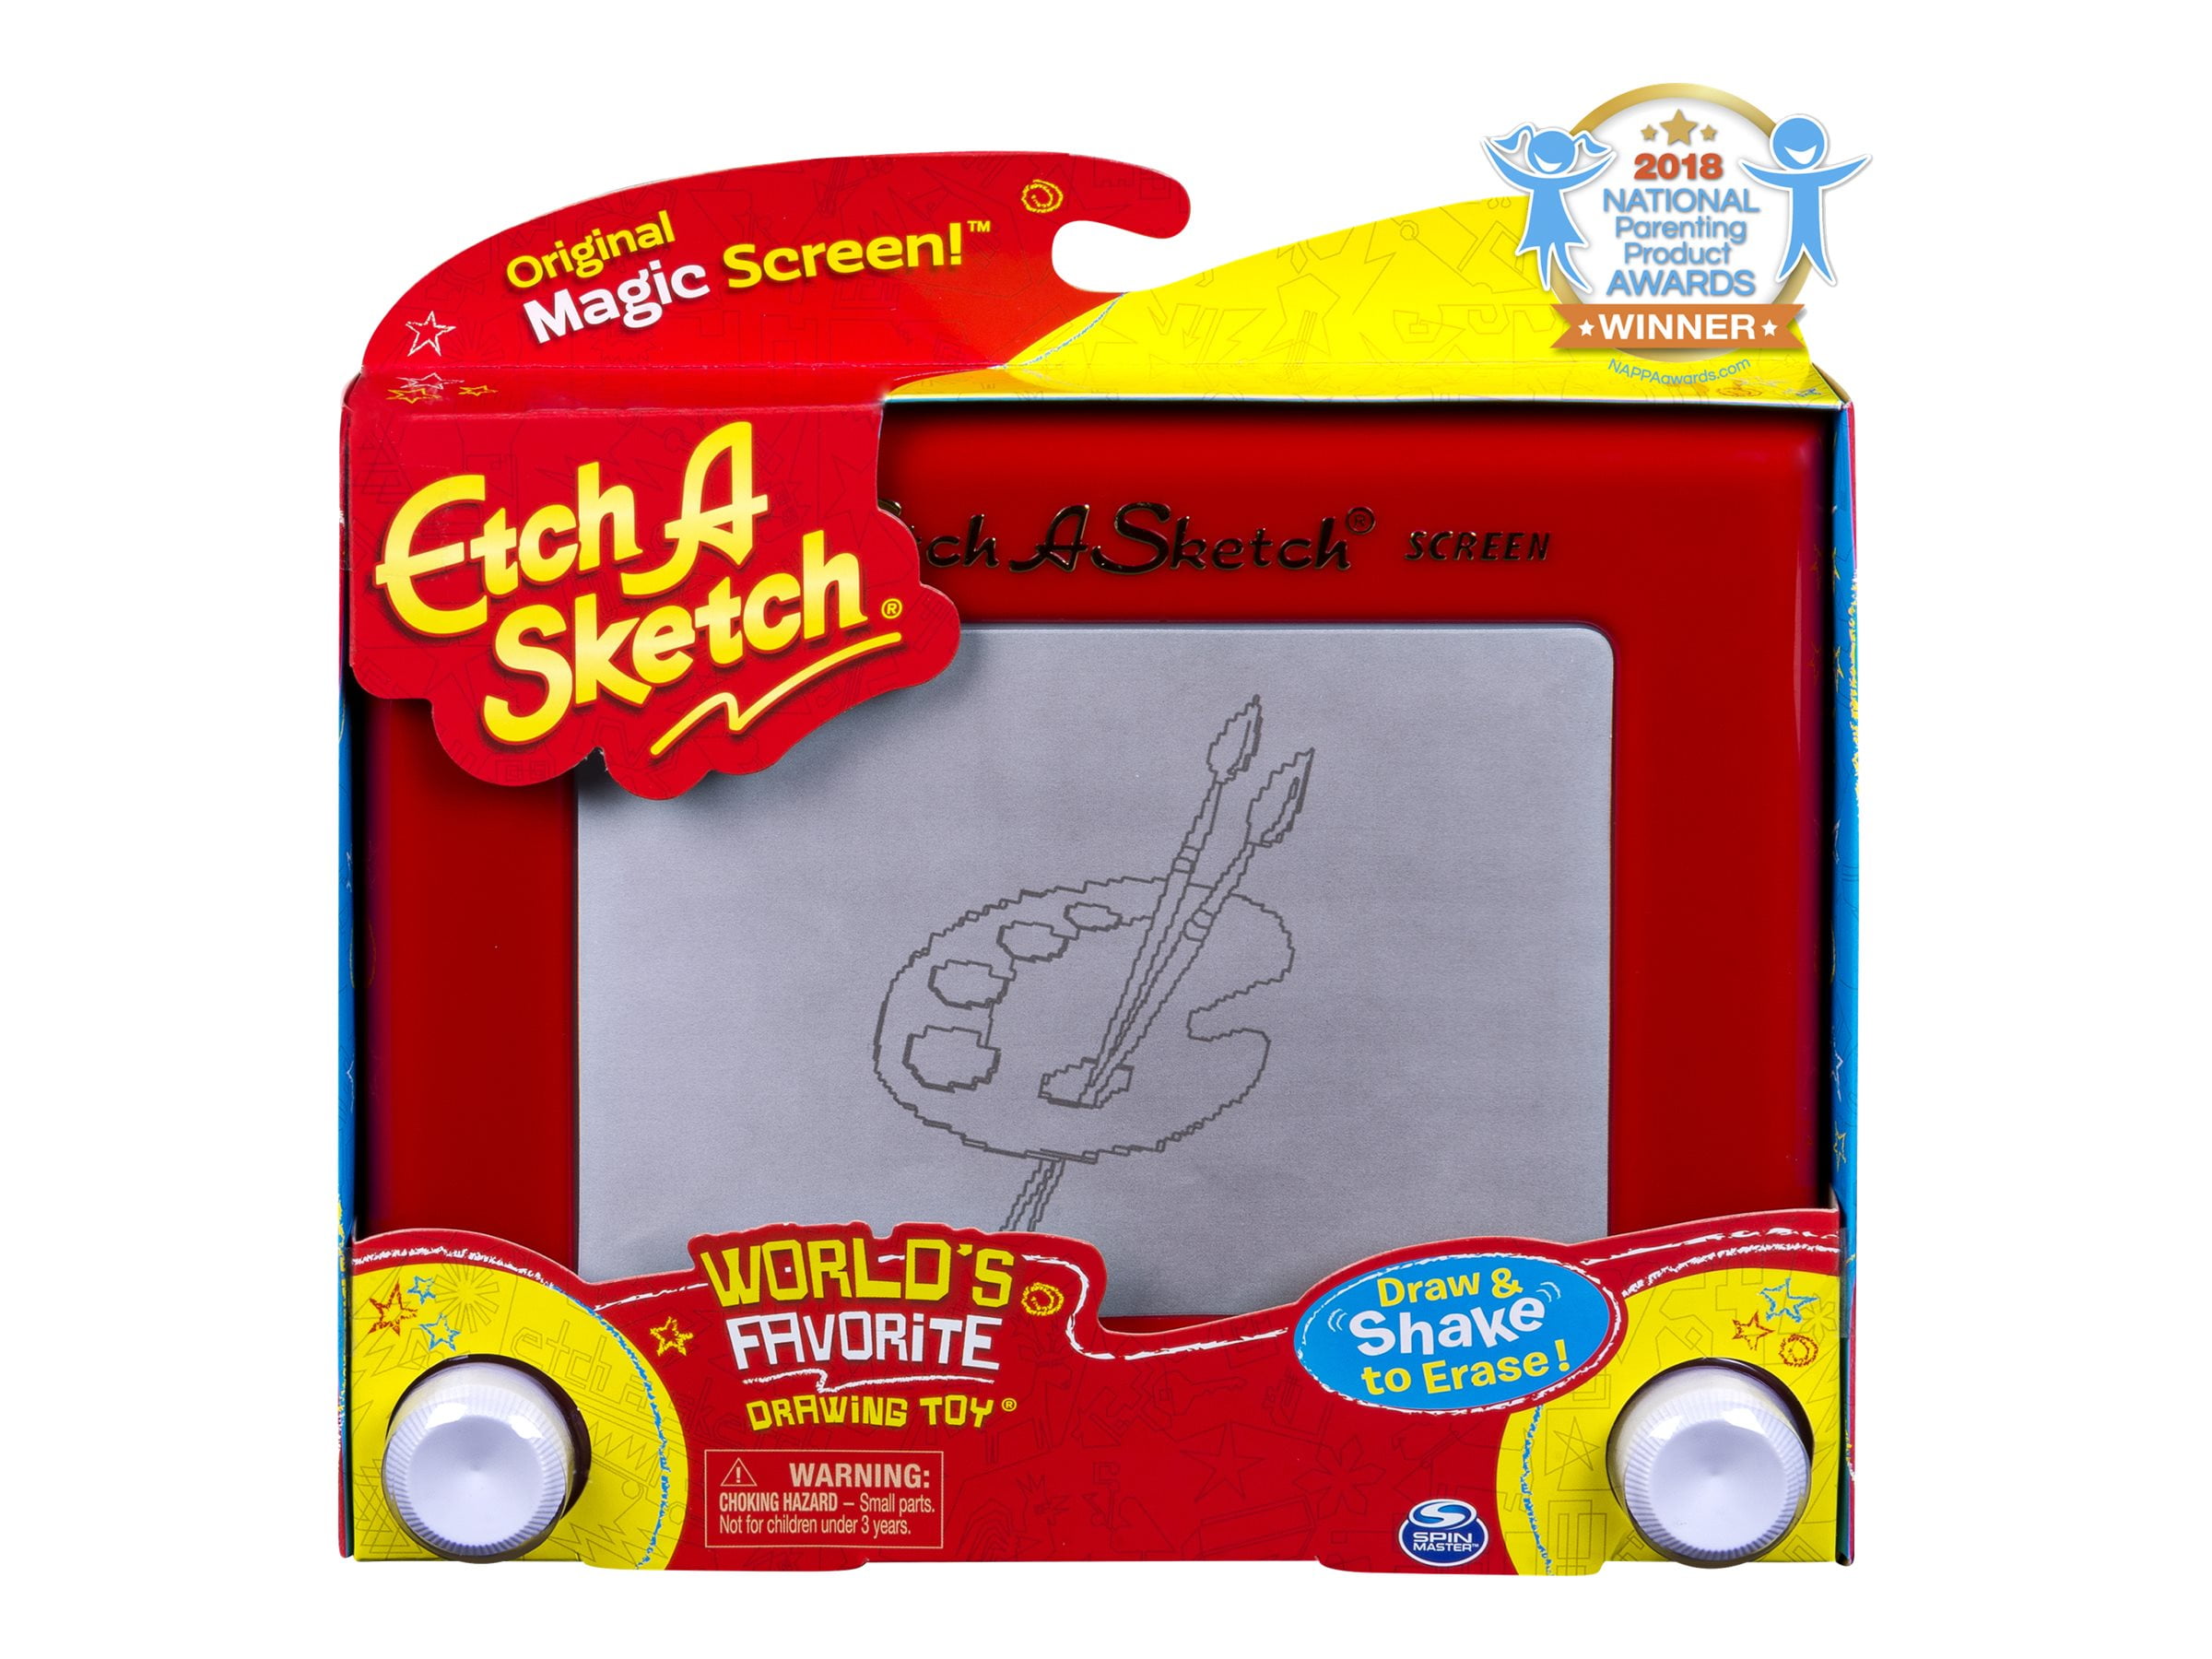 60th Anniversary Diamond Edition with Magic Screen for Ages 3 and Up Etch A Sketch Classic